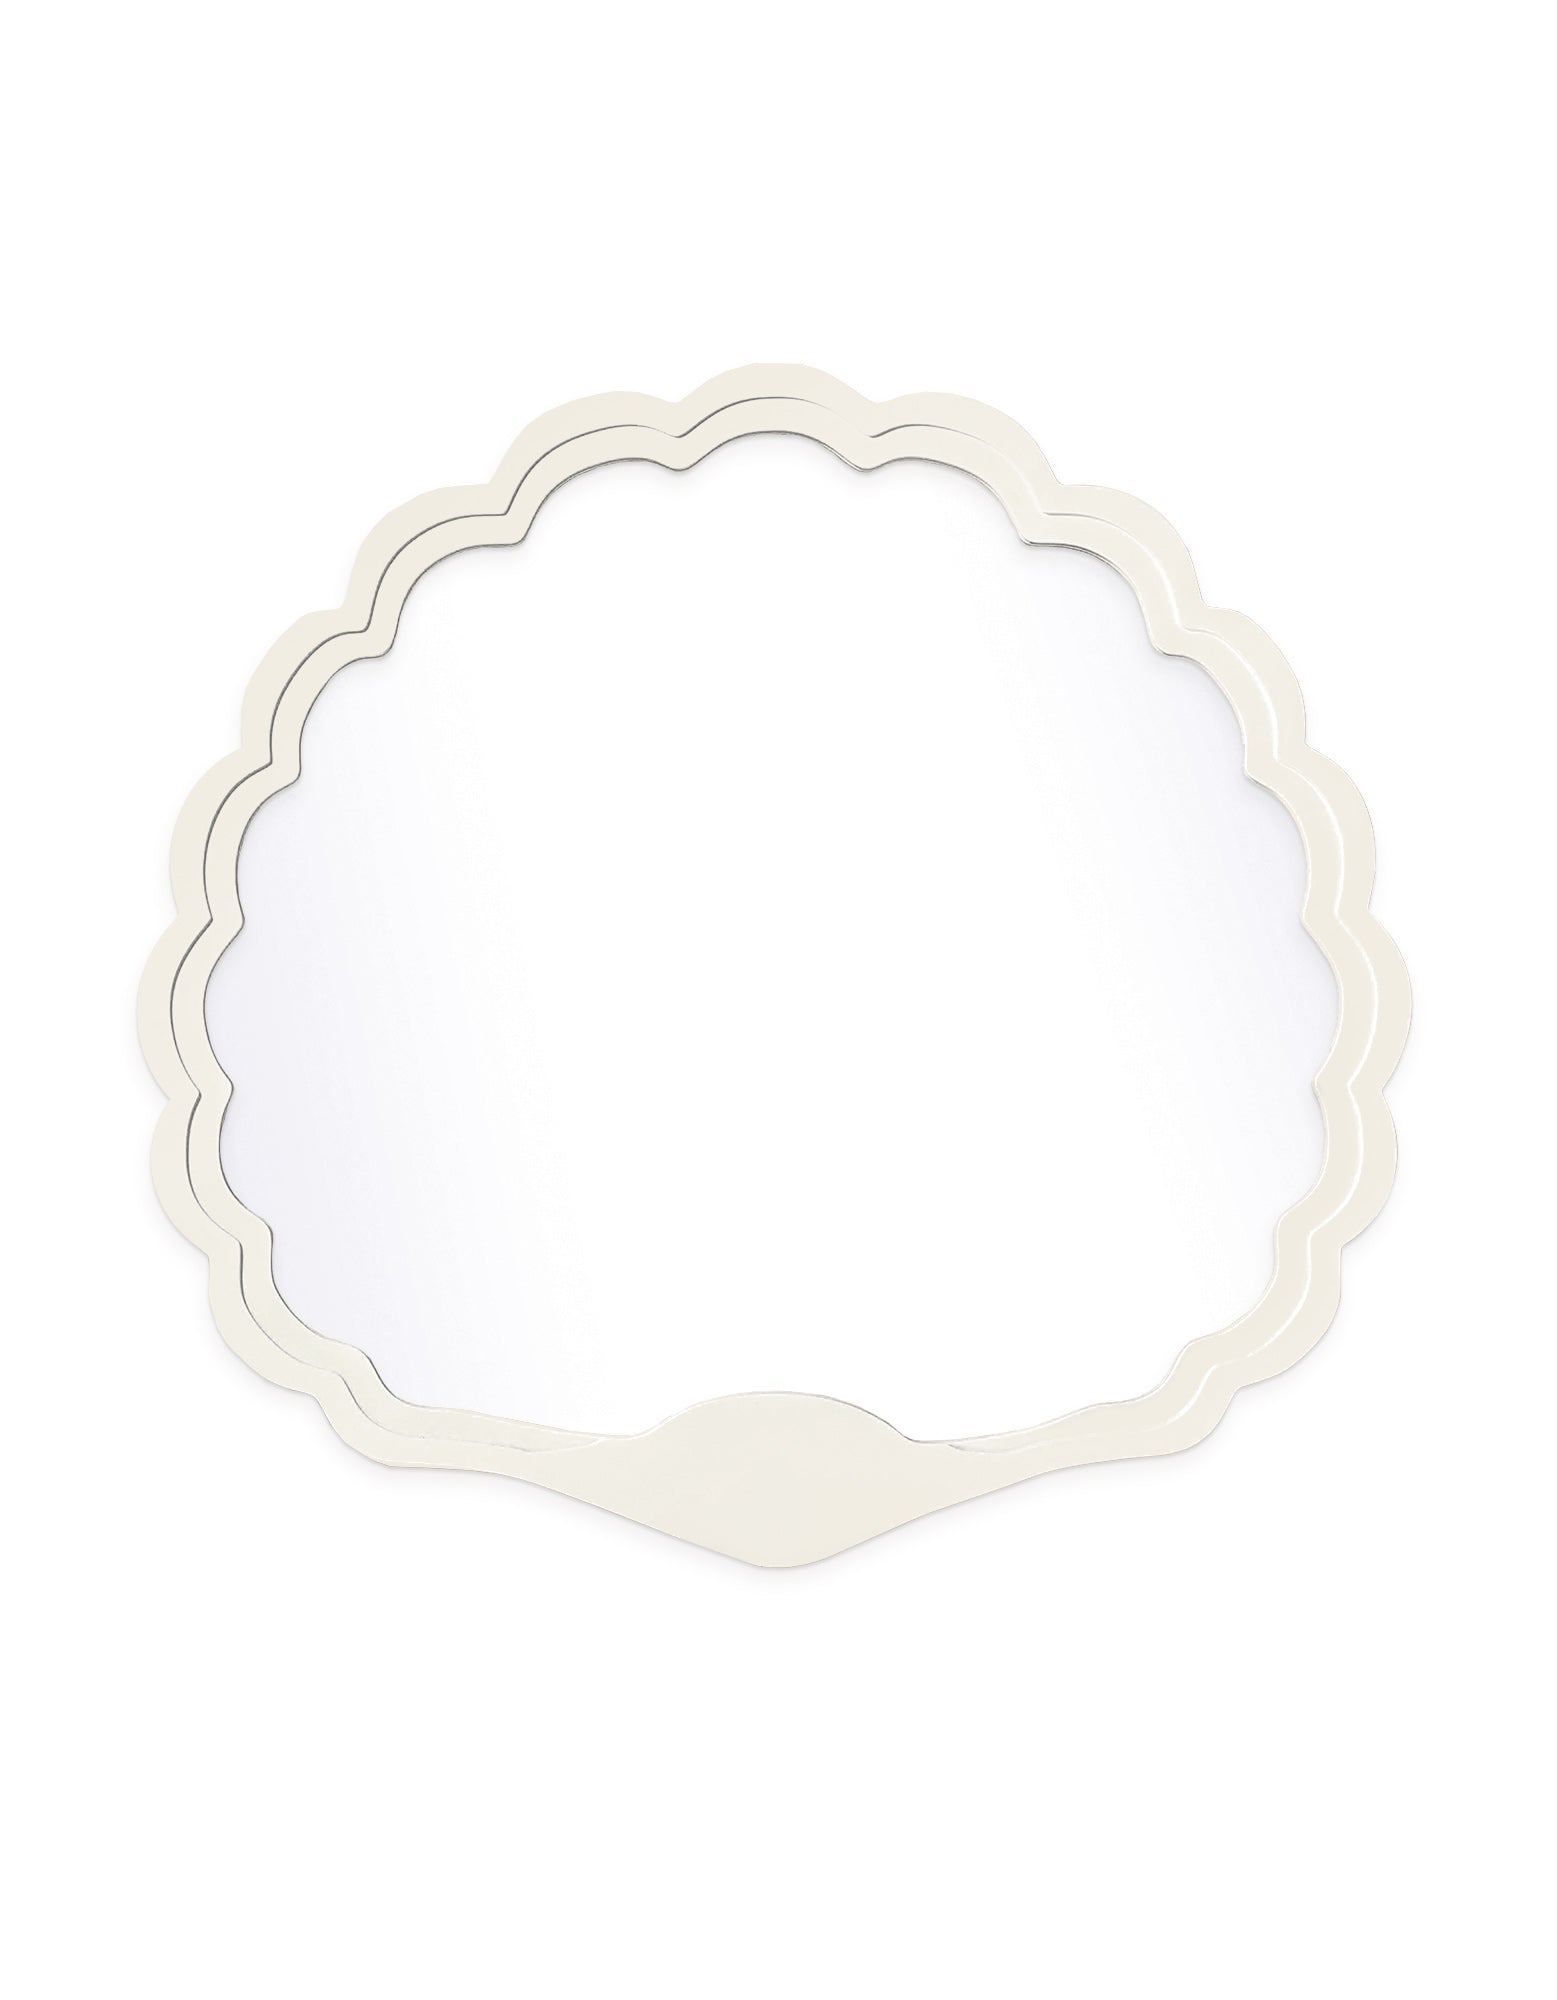 Carnival Proteus Mirror in Swiss Coffee For Sale